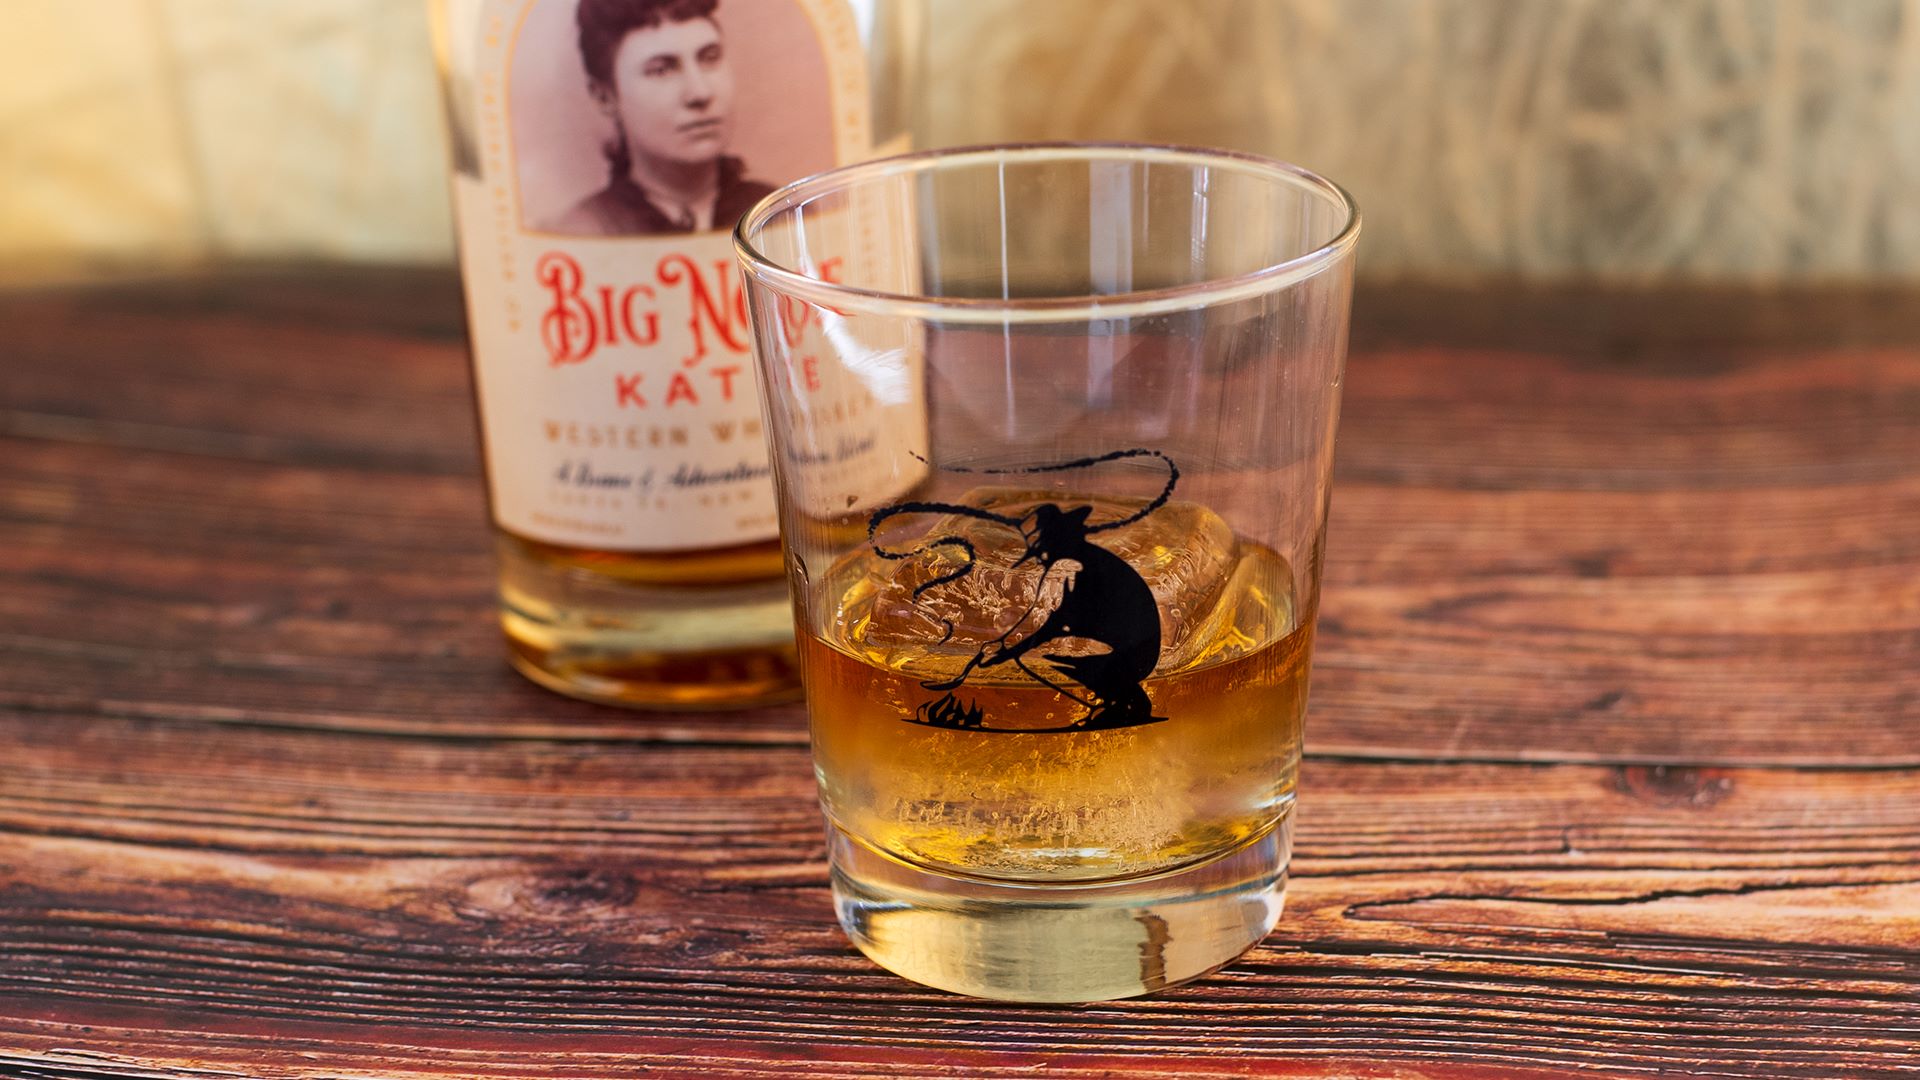 An image of a glass of Big Nose Kate whiskey.